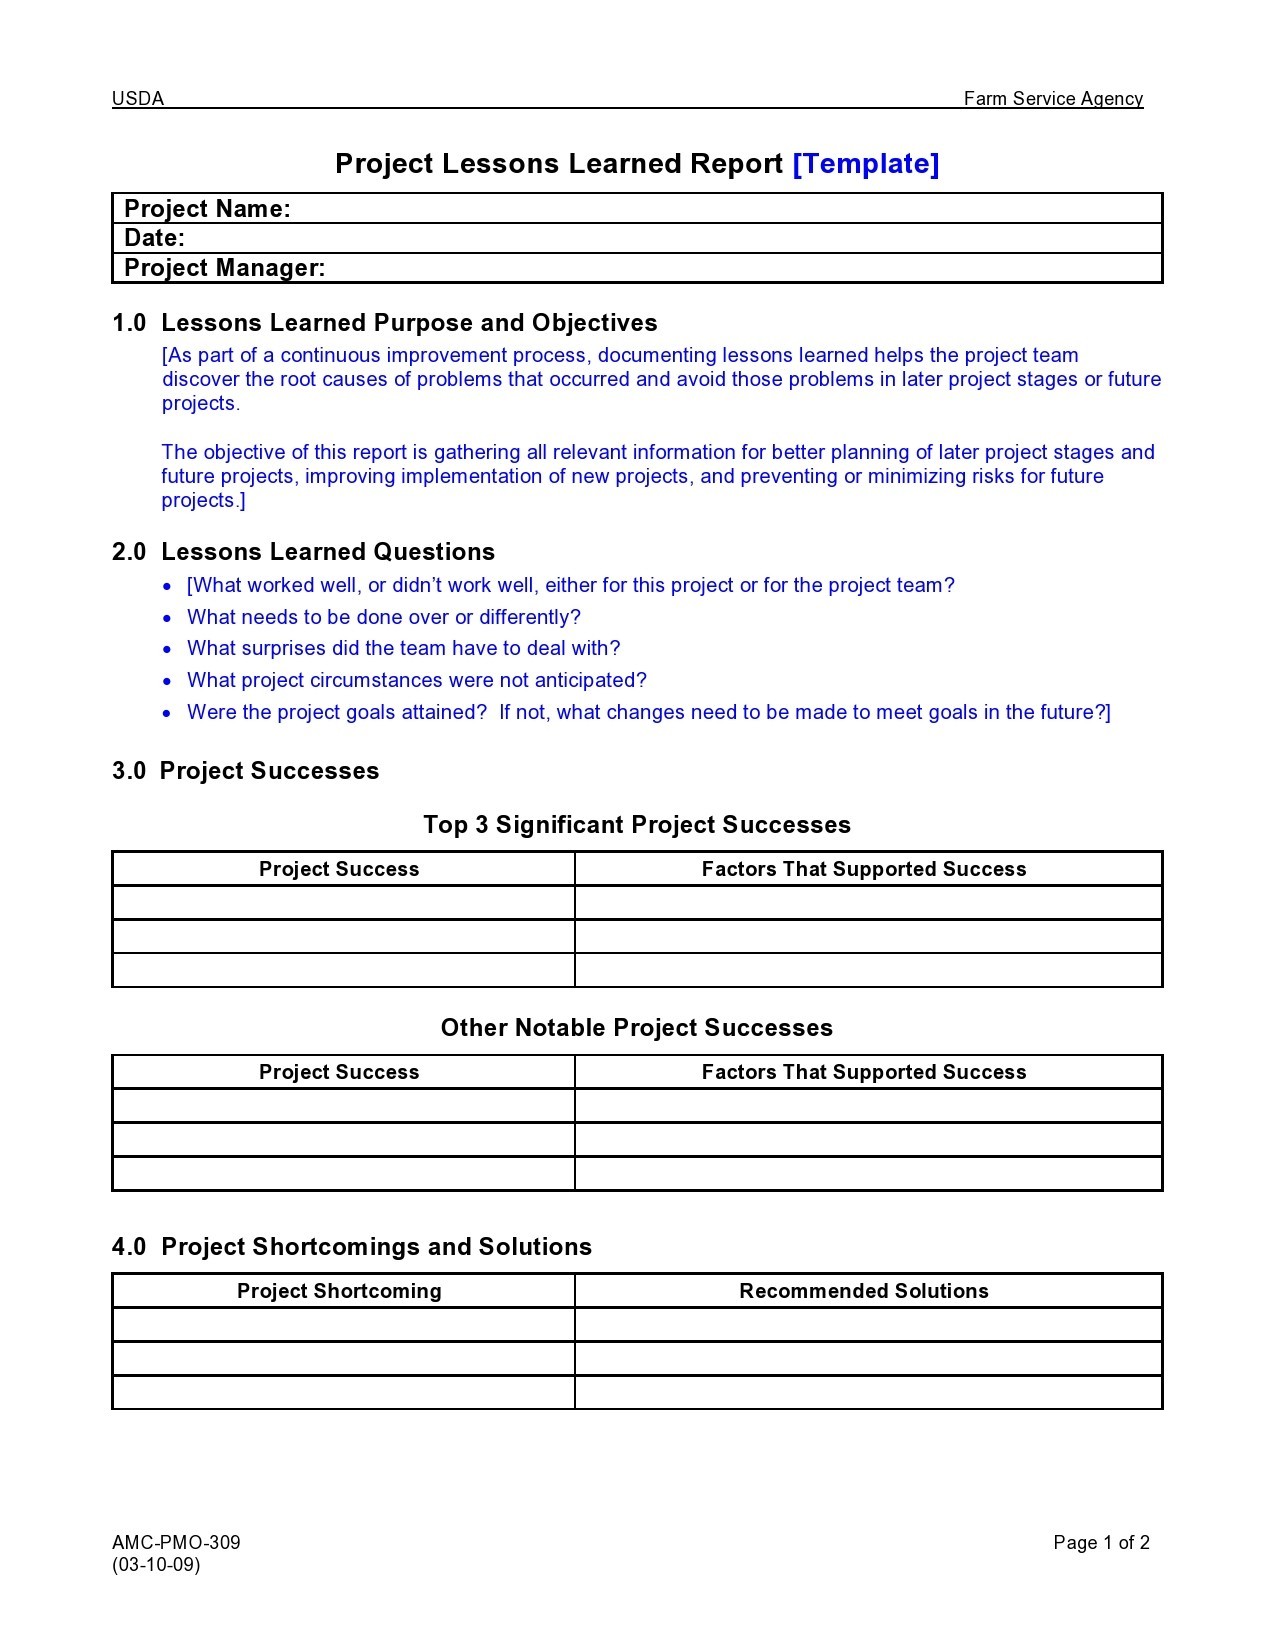 21 Best Lessons Learned Templates [Excel, Word] ᐅ TemplateLab  NCGo Within Lessons Learnt Report Template